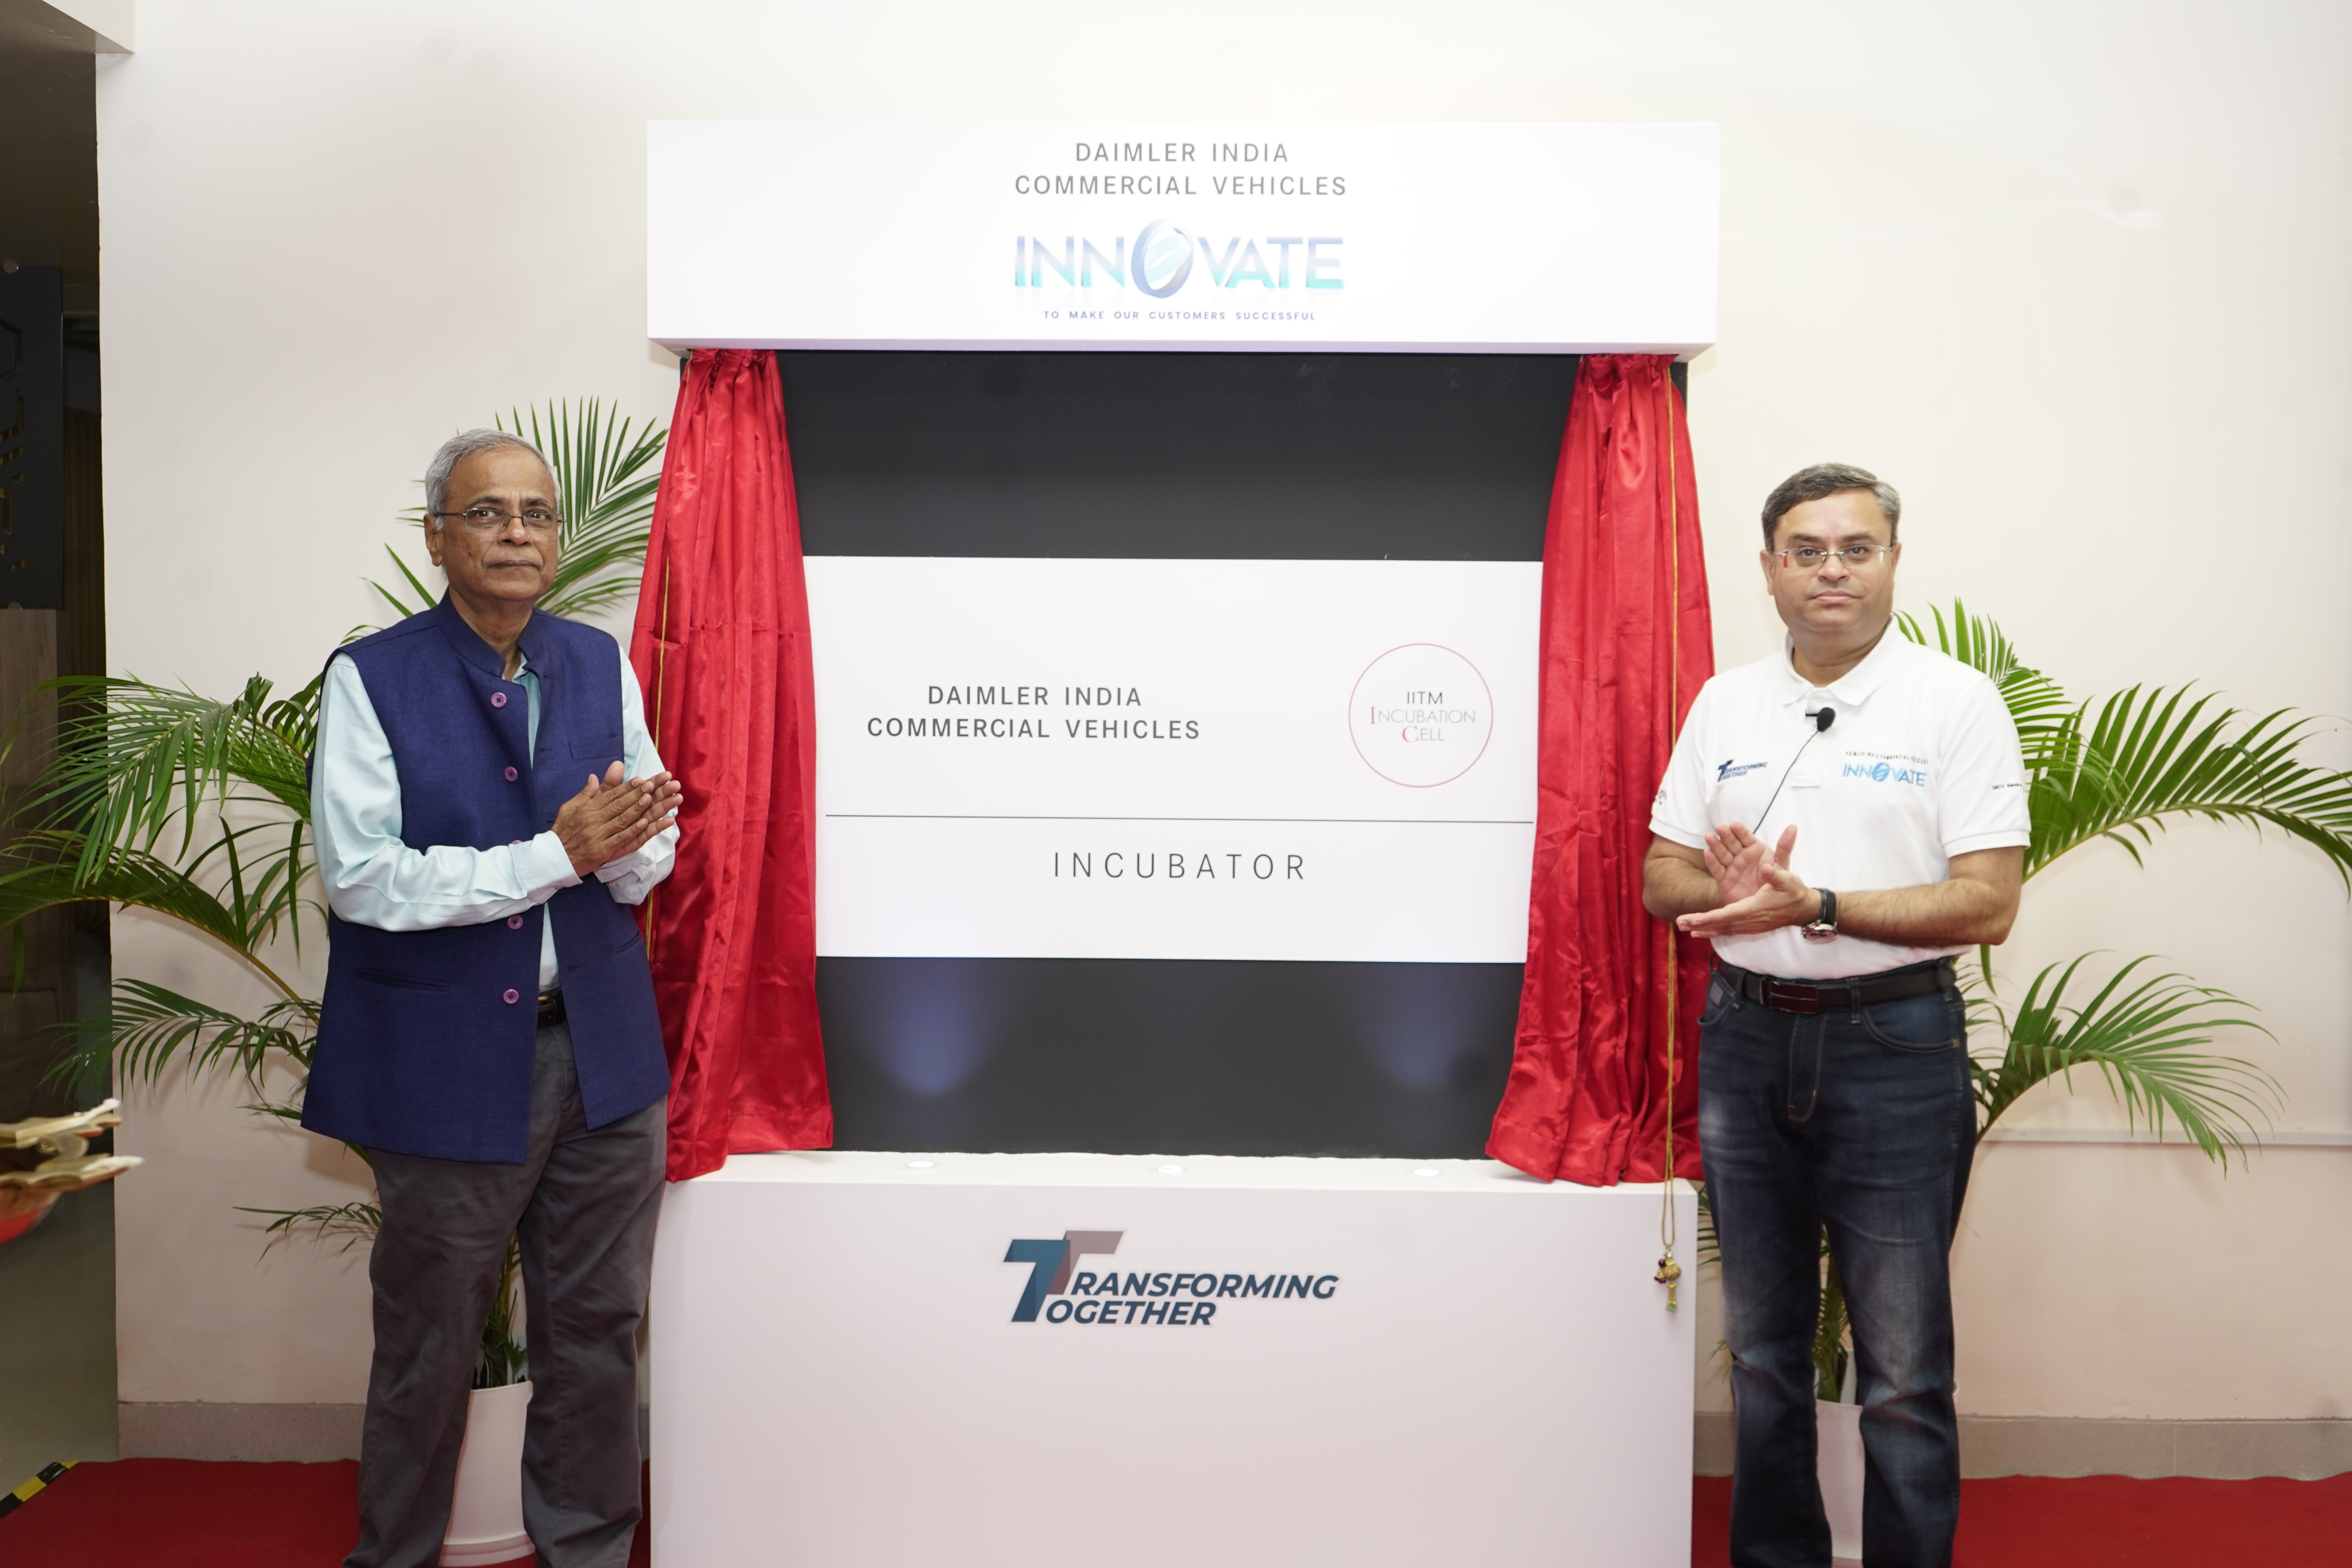 daimler-india-commercial-vehicles-partners-with-iit-madras-incubation-cell-to-accelerate-future-mobility-solutions